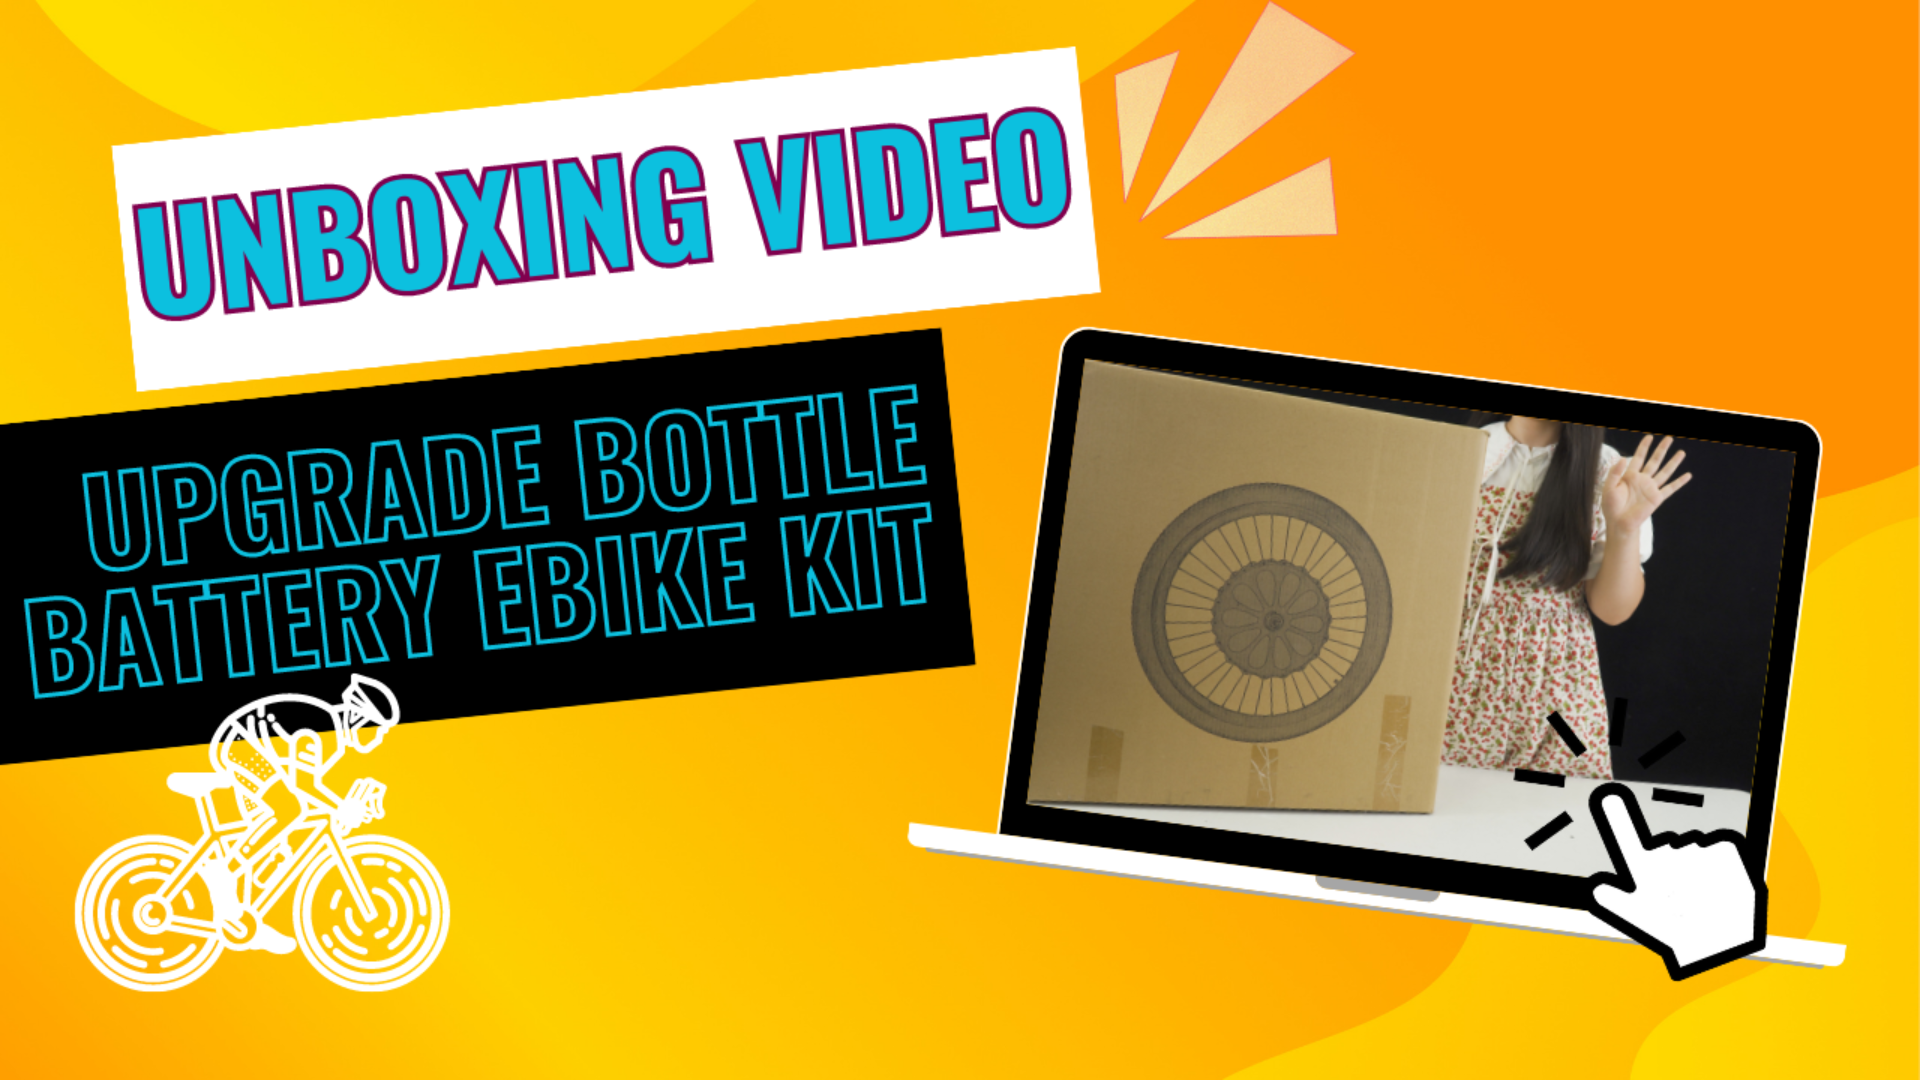 Upgraded Bottle Battery Ebike Kit ‖ Unboxing Video ‖ Guess What's Inside the Package ????